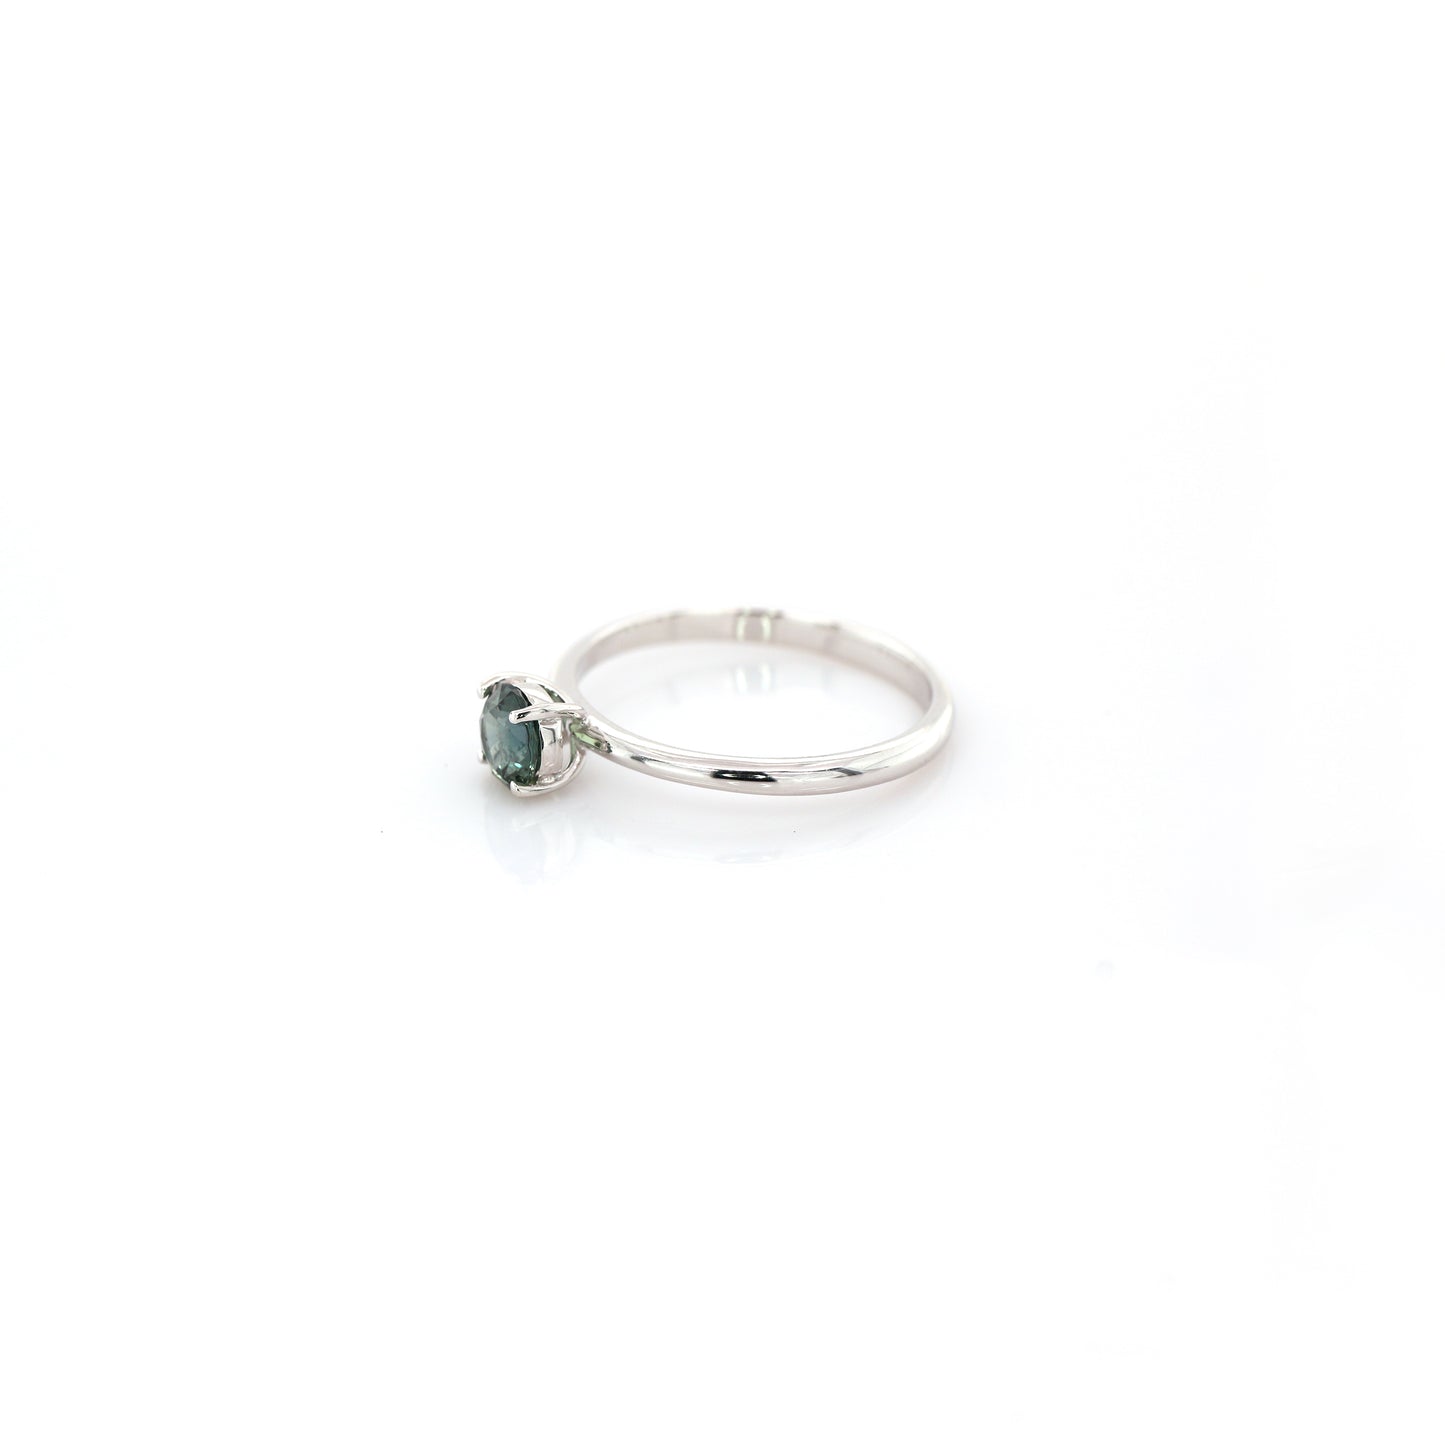 Teal Sapphire Ring 18k White Gold 1.35 gm